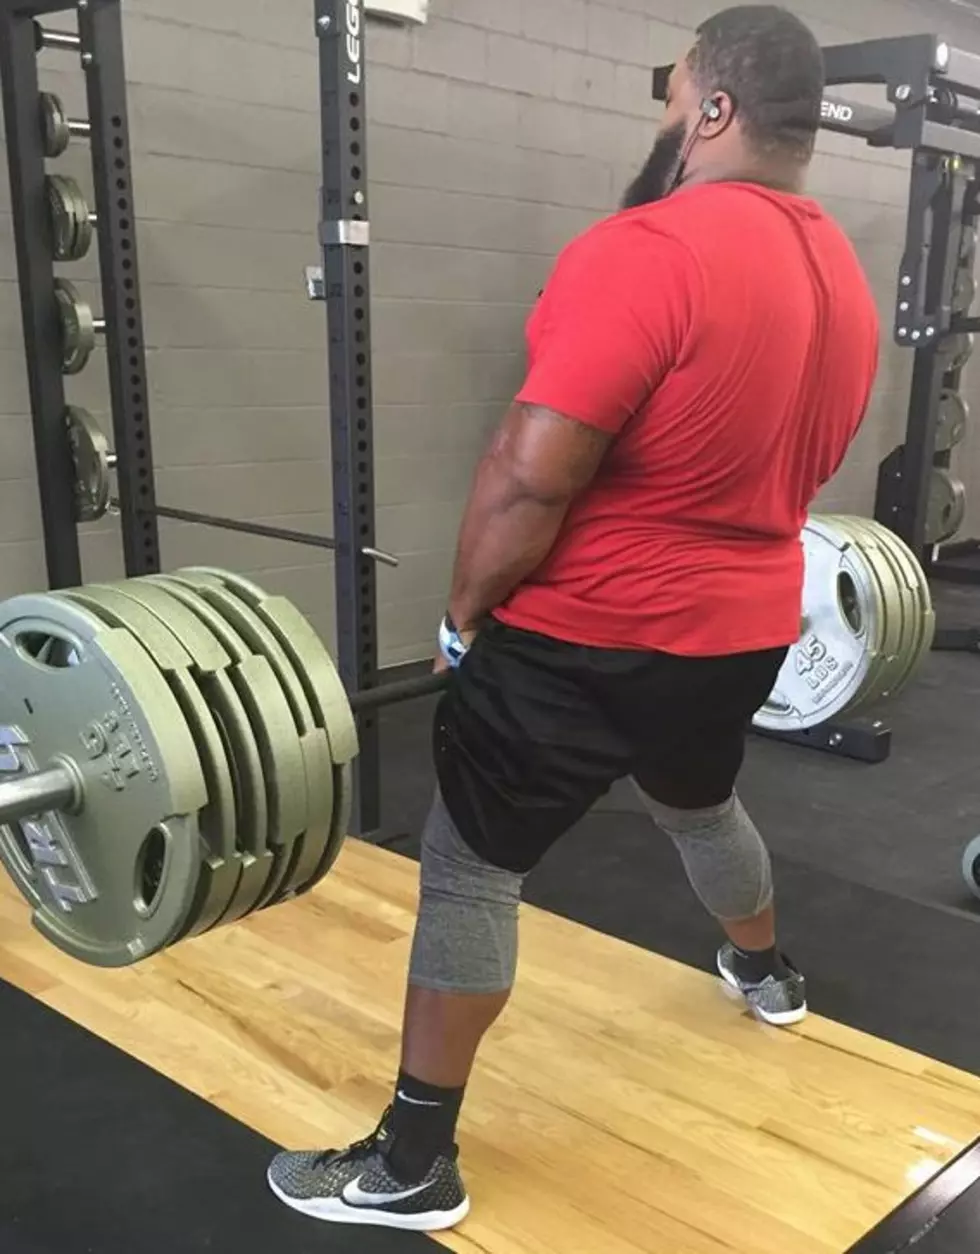 Owensboro’s Julius Maddox #1 In The United States In Raw Bench Press Ranking (VIDEO)